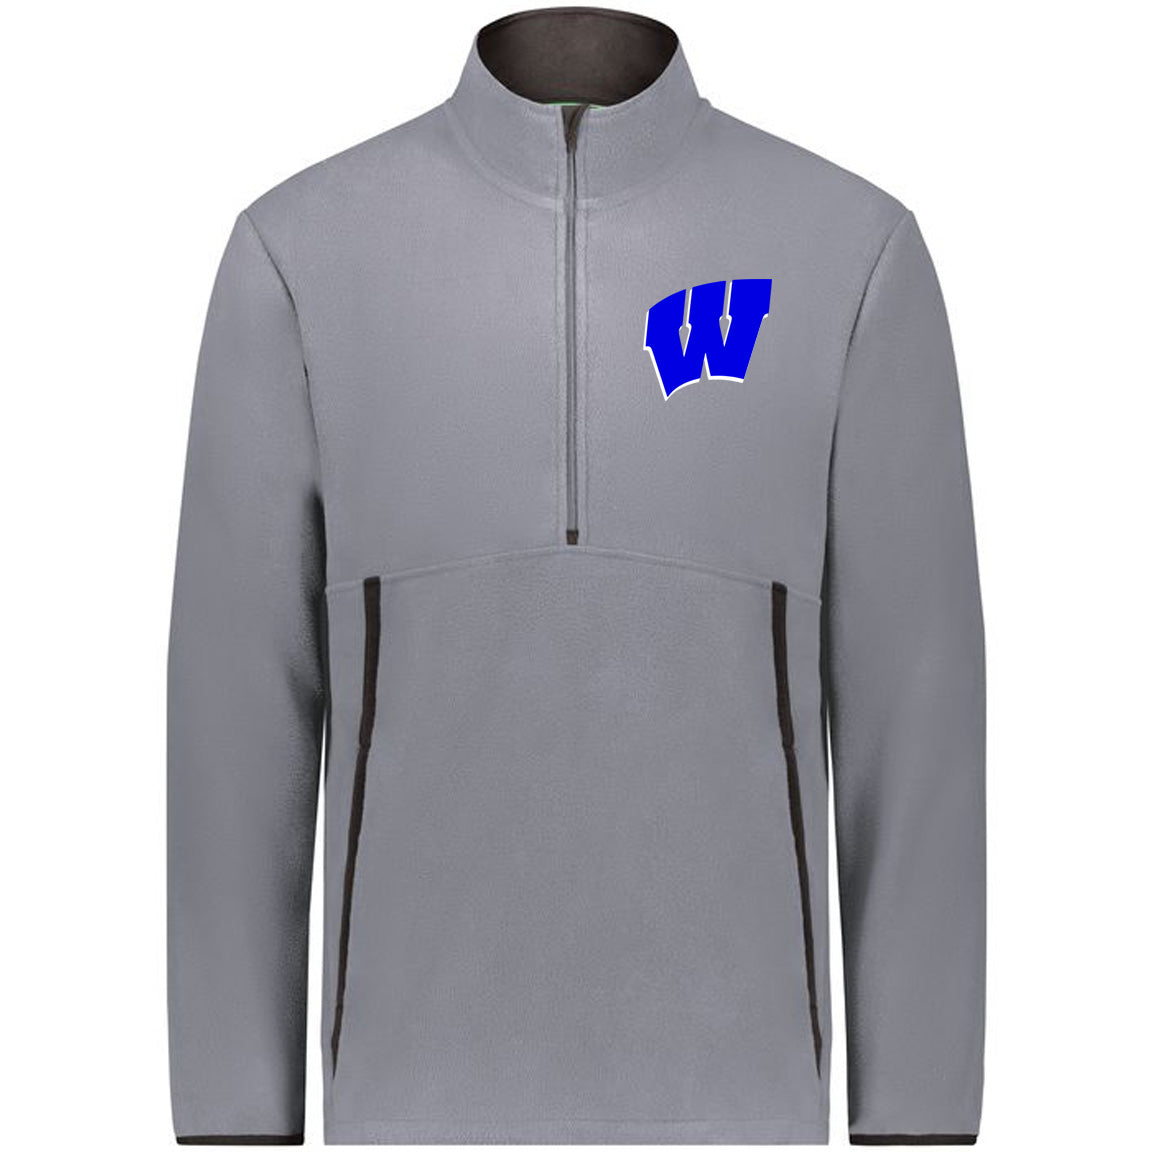 Windsor - Chill Fleece 2.0 1-2 Zip Pullover with Embroidered W - Graphite - Southern Grace Creations